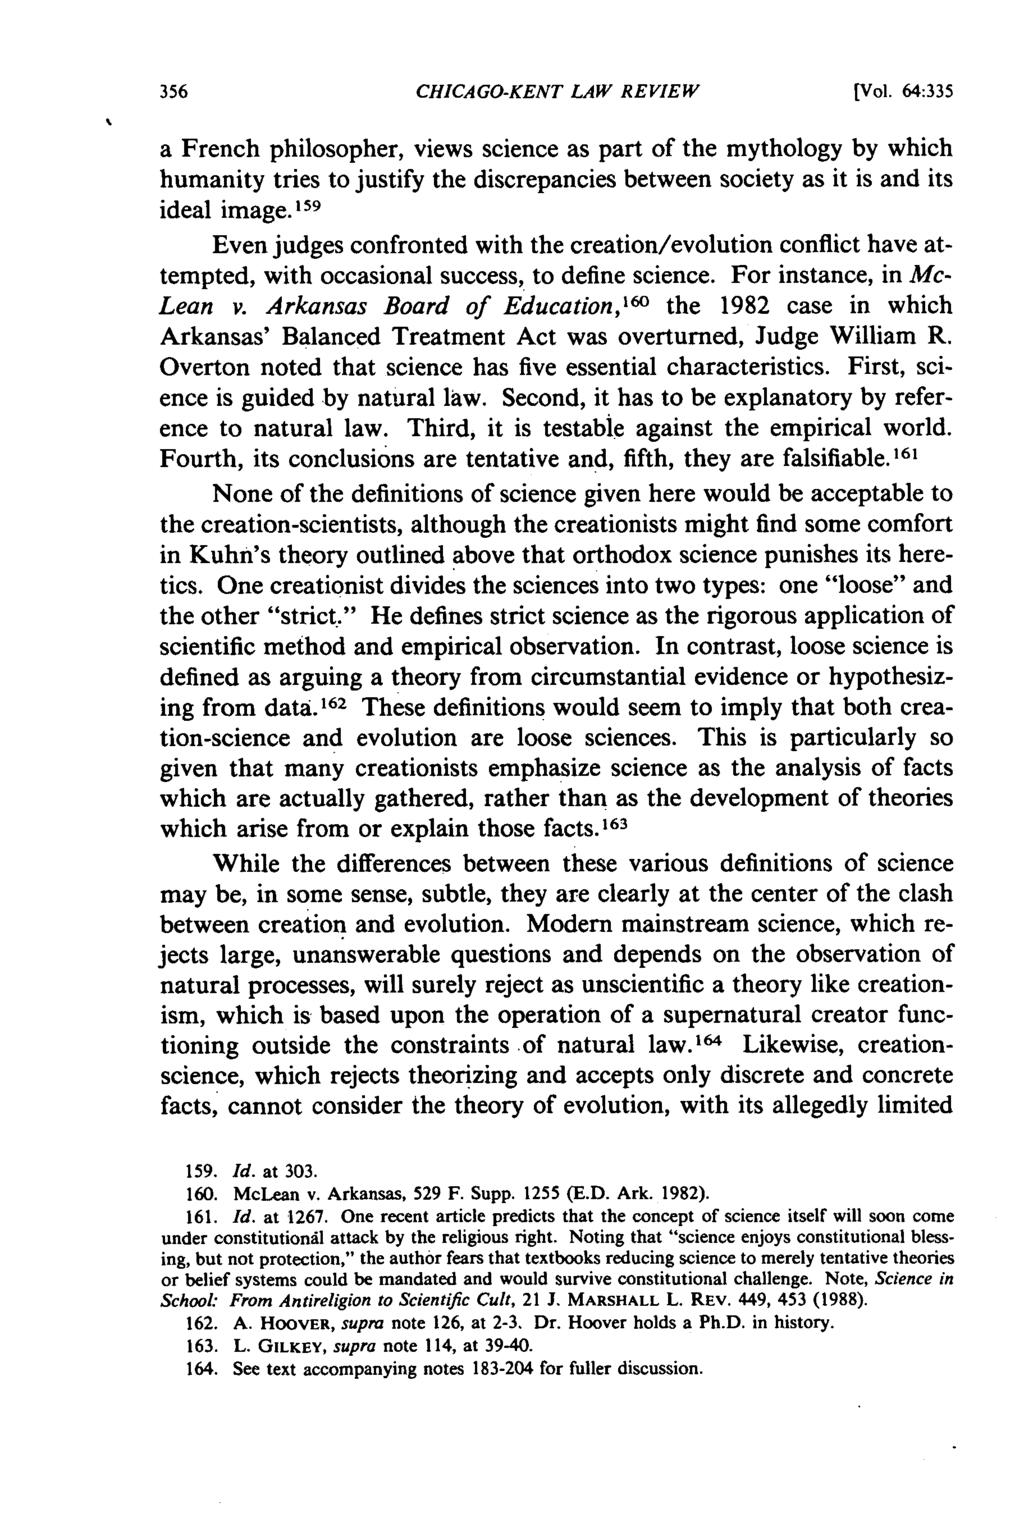 CHICAGO-KENT LAW REVIEW [Vol. 64:335 a French philosopher, views science as part of the mythology by which humanity tries to justify the discrepancies between society as it is and its ideal image.